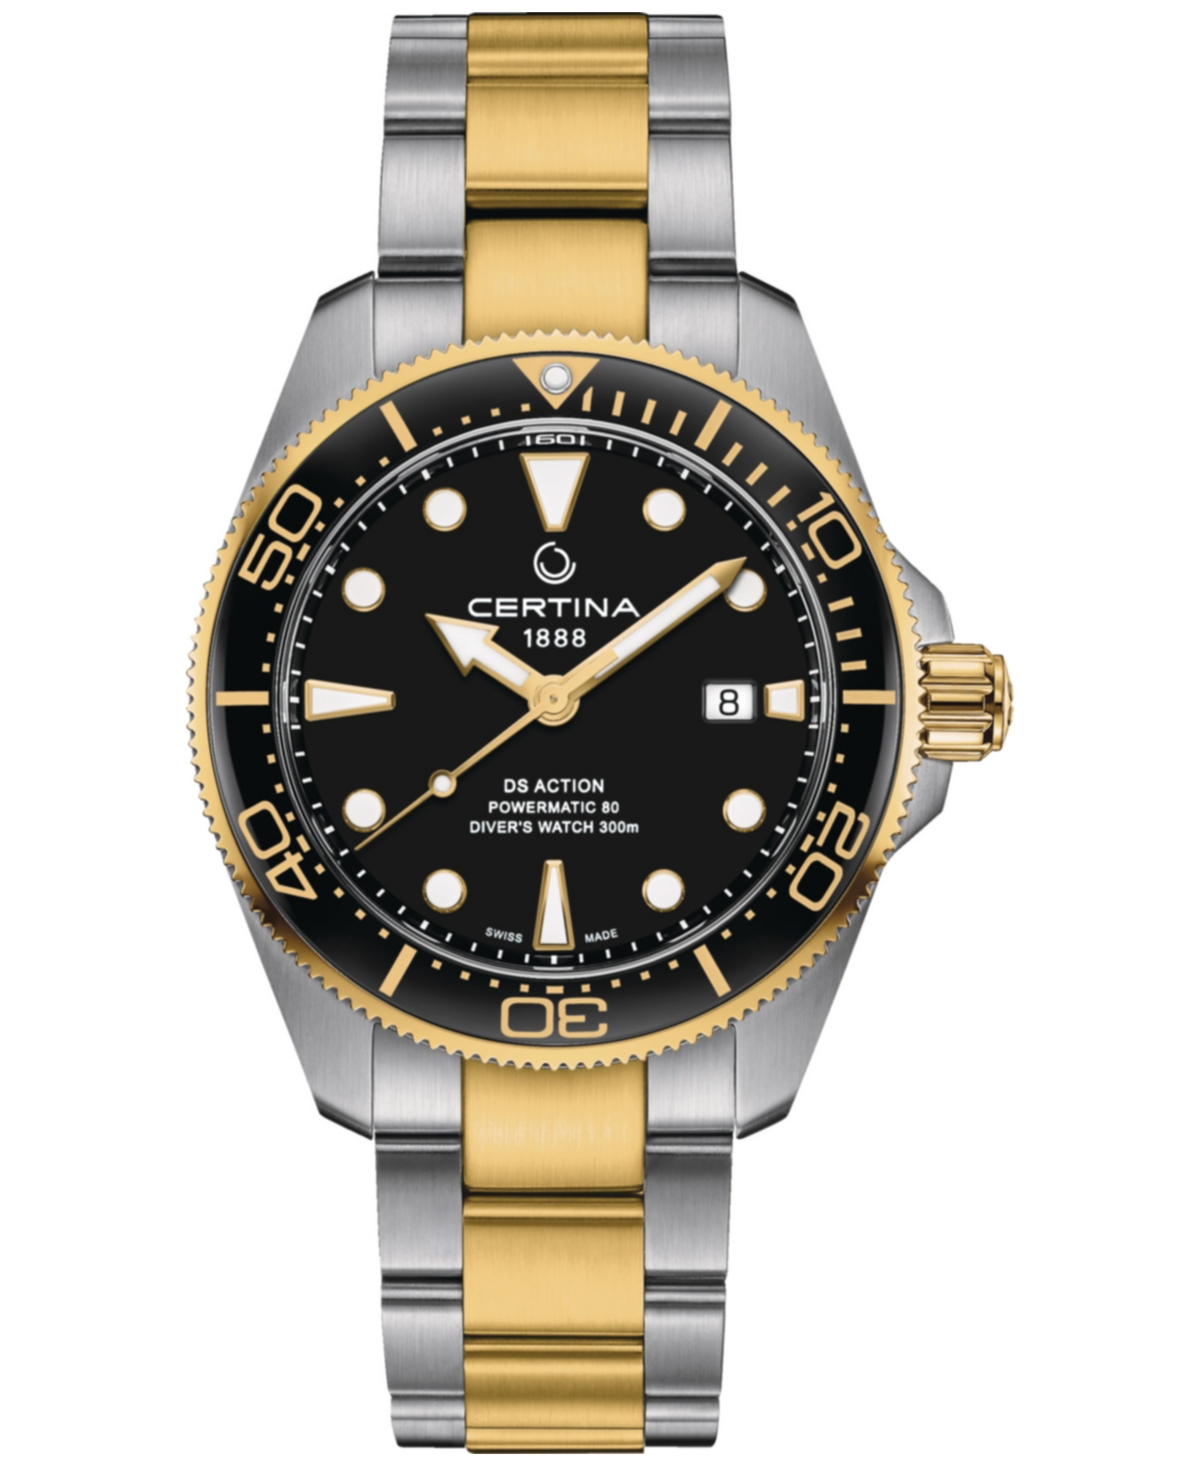 Certina Men's Swiss Automatic Ds Action Diver Two-tone Stainless Steel Bracelet Watch 43mm In Black